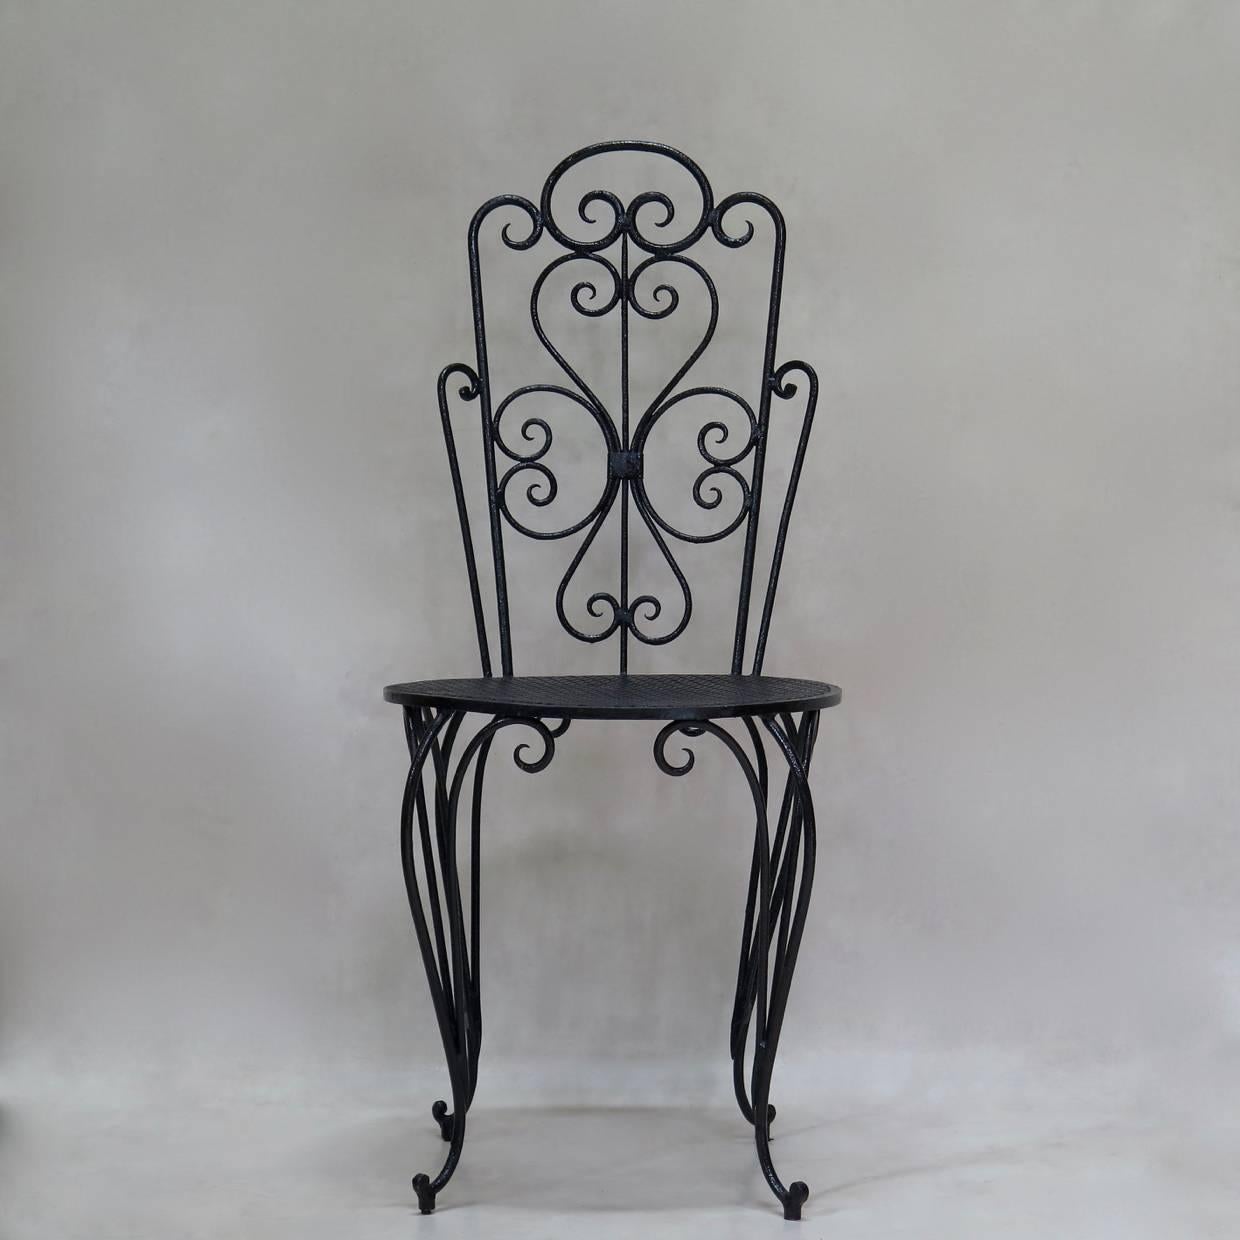 Alluring pair of iron side chairs, with original glossy black paint. Curlicue design on backs. The round seats have a traditional cloverleaf pattern and are raised on cabriole legs, ending in dainty scrolled feet.